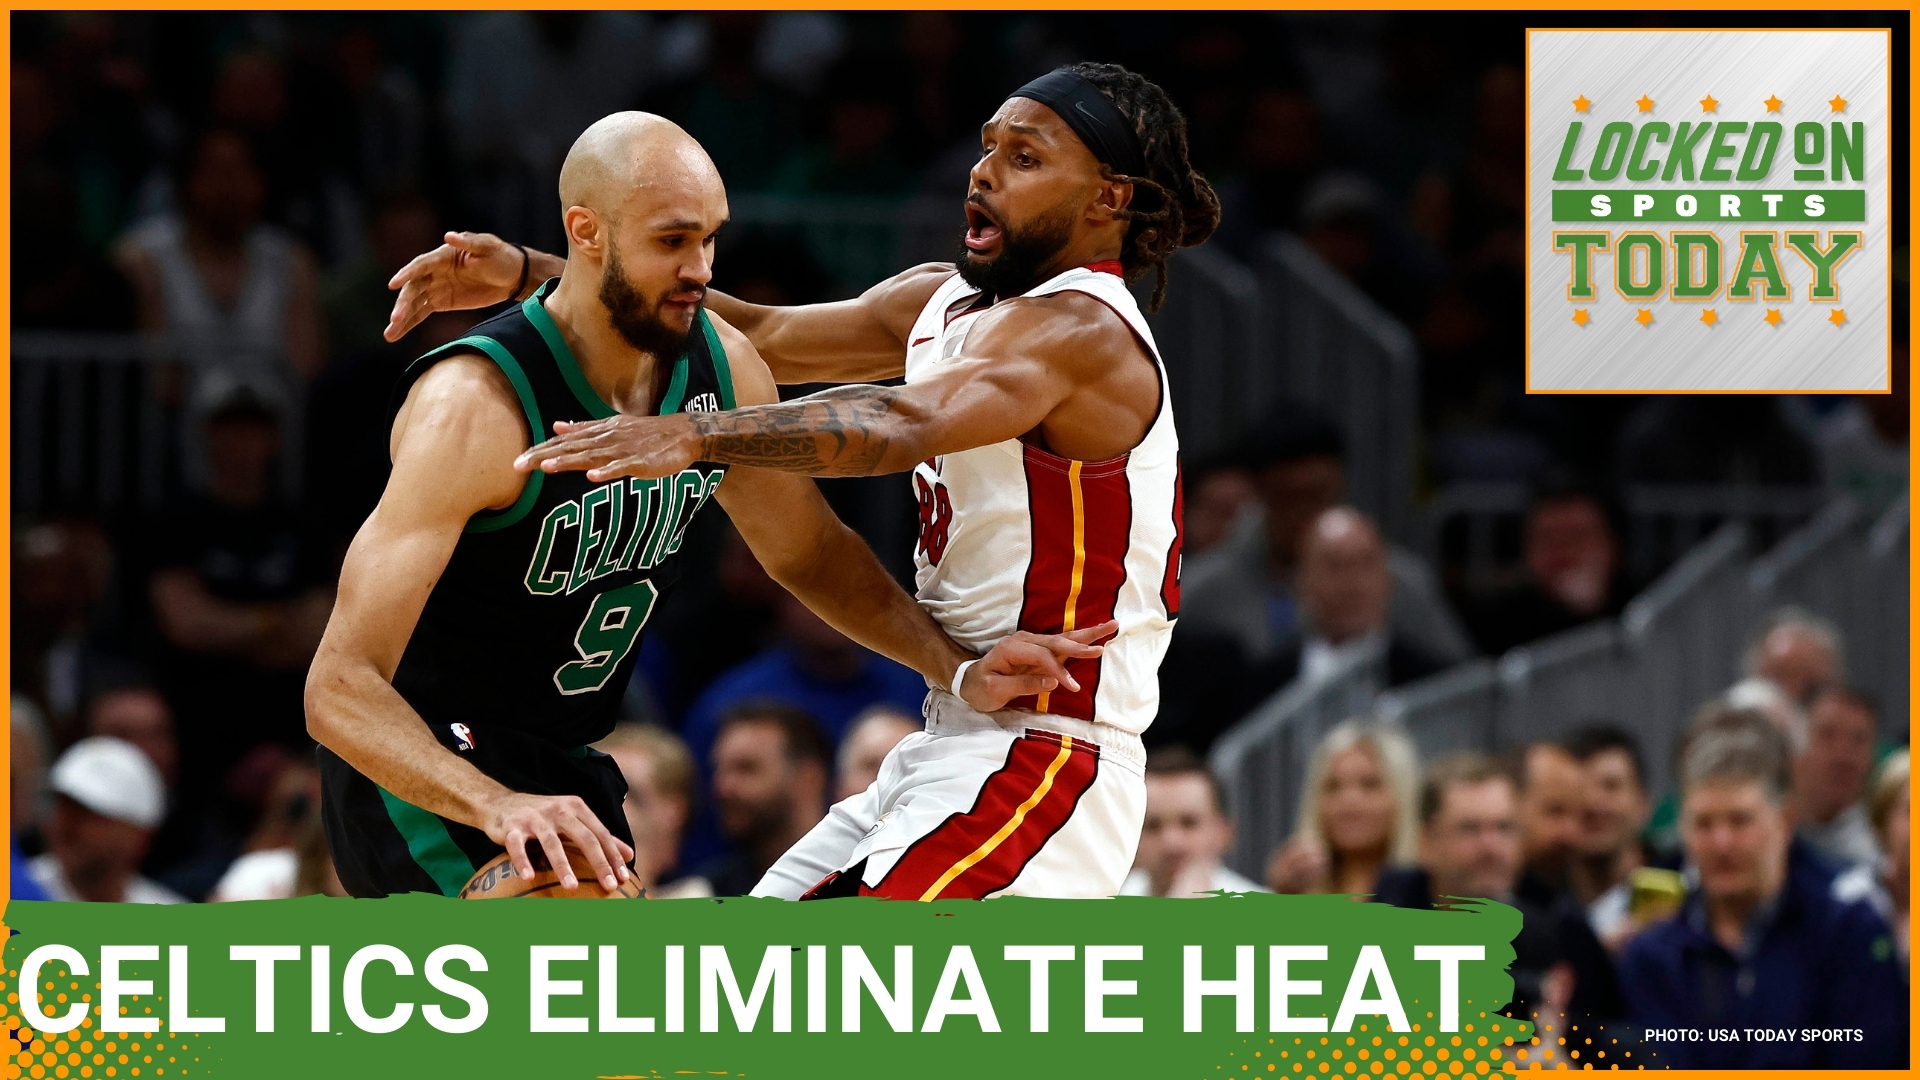 The Miami Heat were eliminated by the Boston Celtics in the NBA Playoffs. Luka Doncic and the Dallas Mavericks are in am amazing series vs the Los Angeles Clippers.